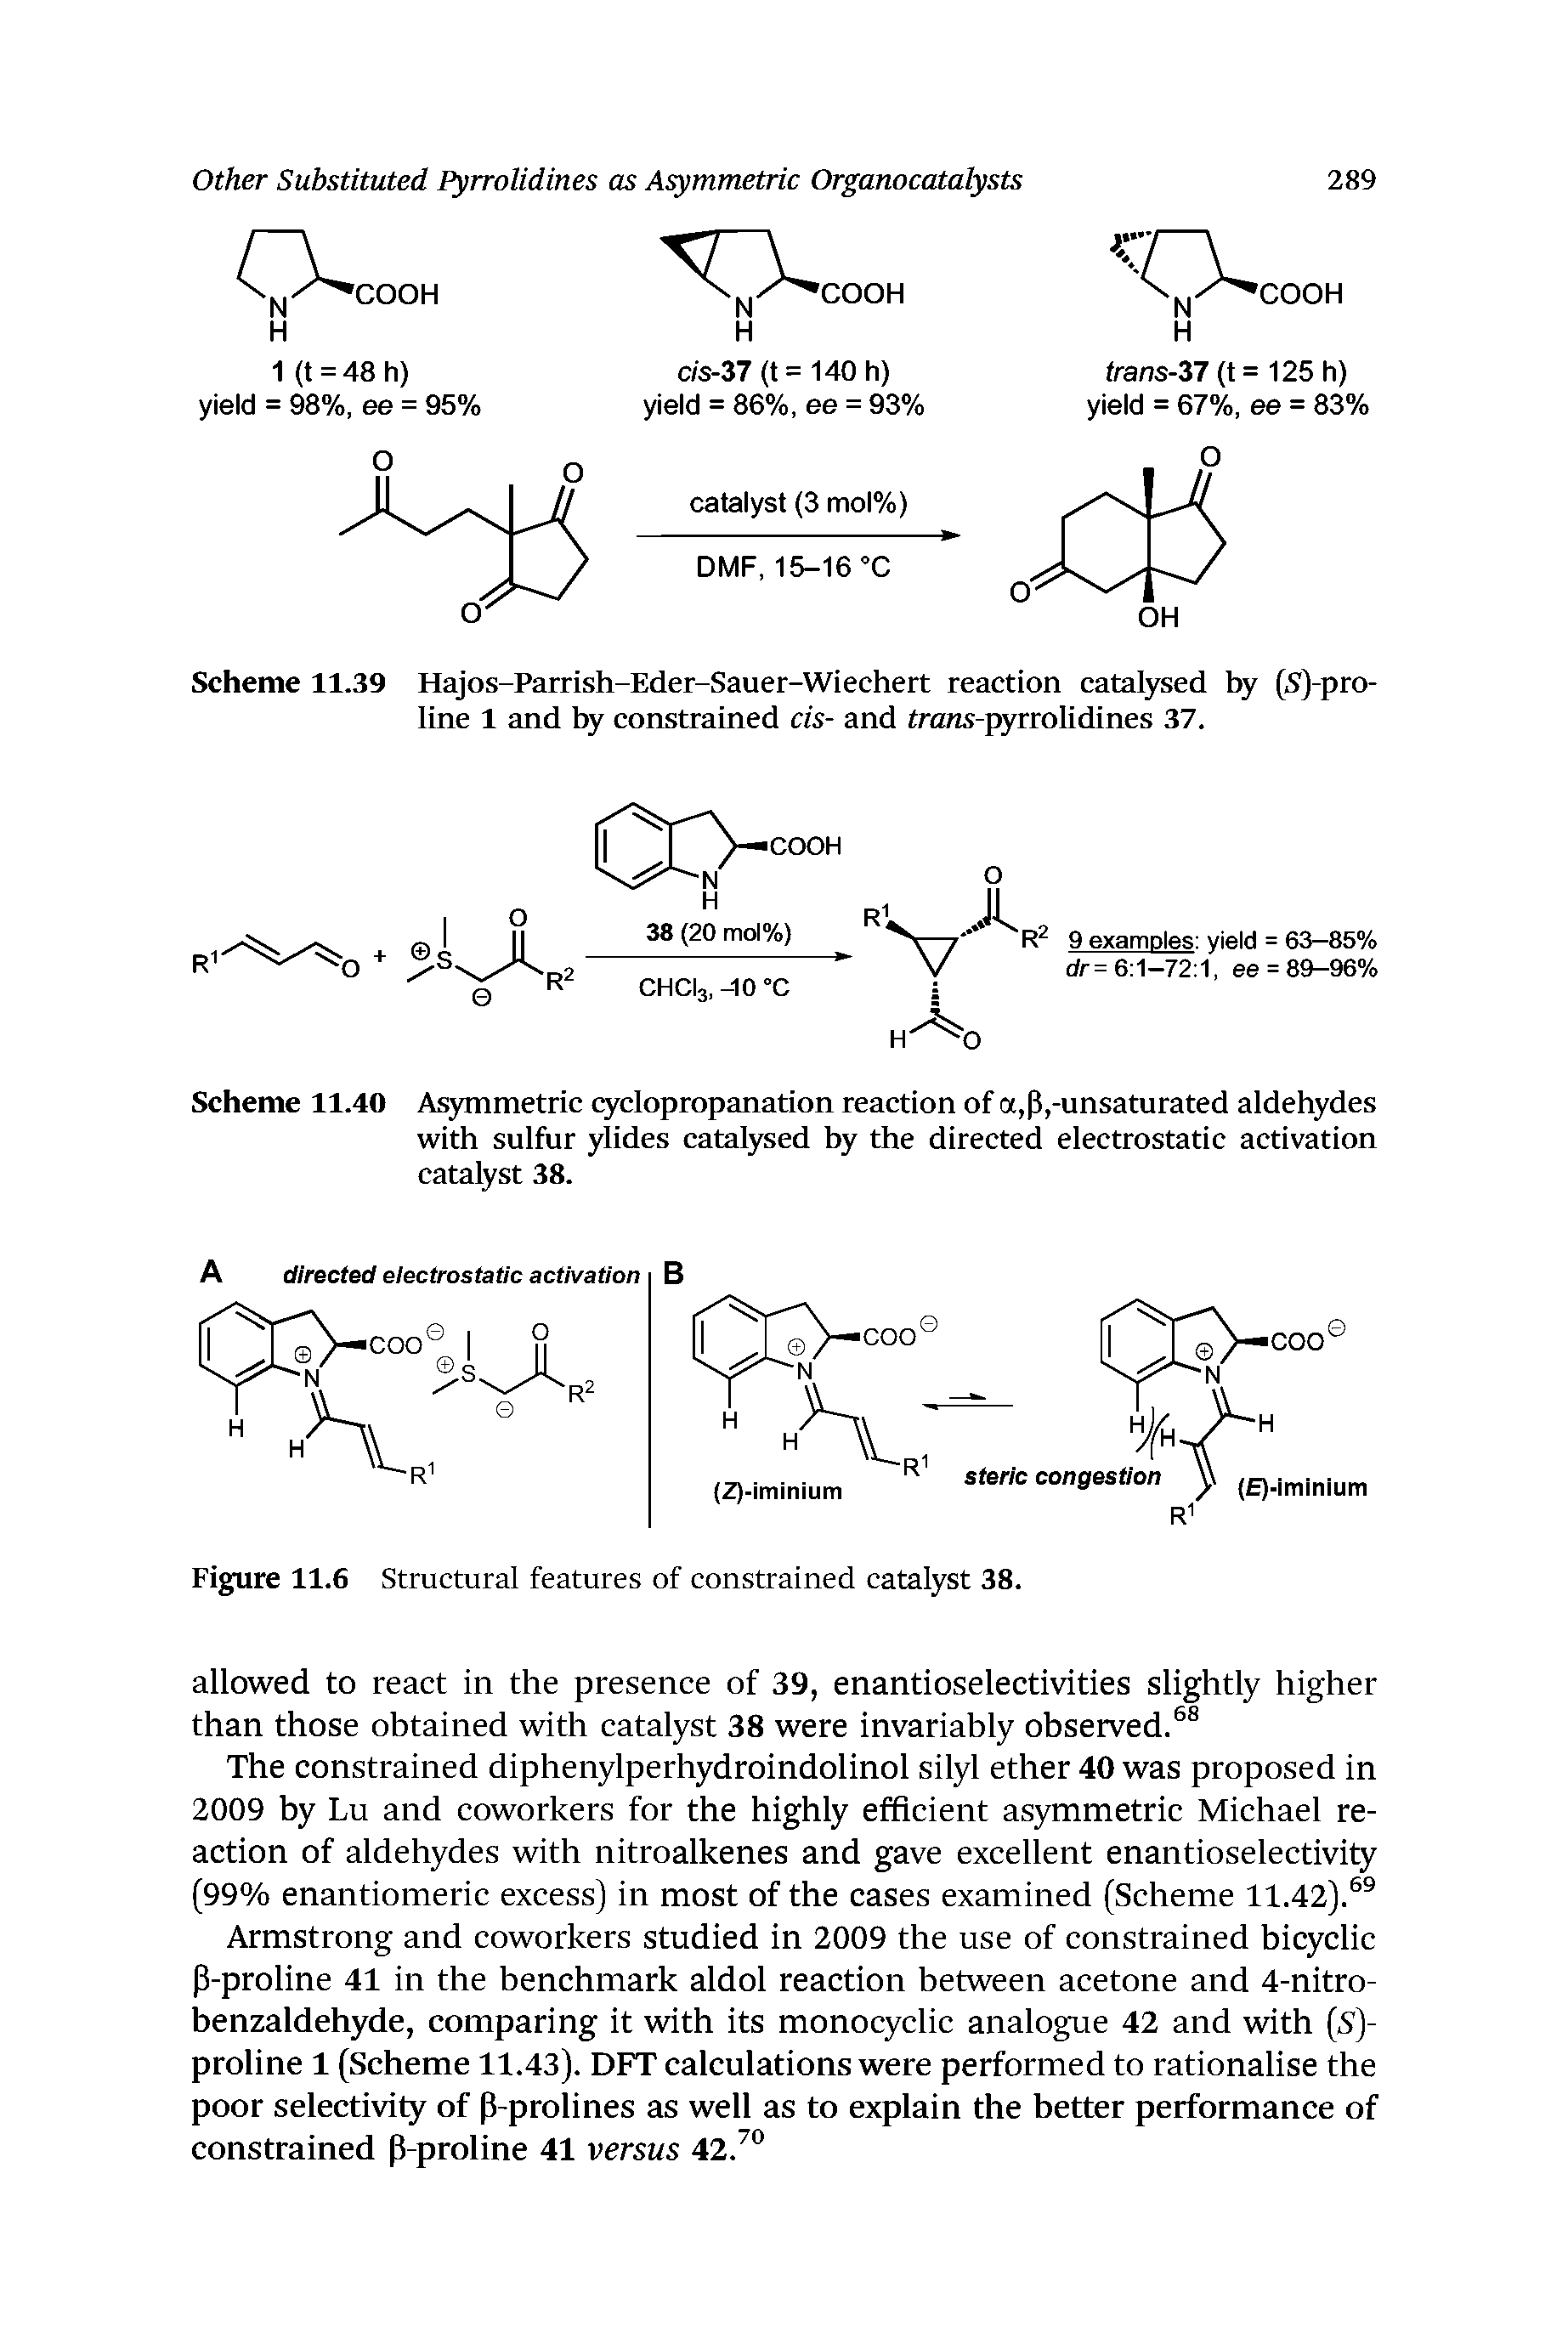 Scheme 11.40 As3mmetric q clopropanation reaction of a,p,-unsaturated aldehydes with sulfur ylides catalysed by the directed electrostatic activation catalyst 38.